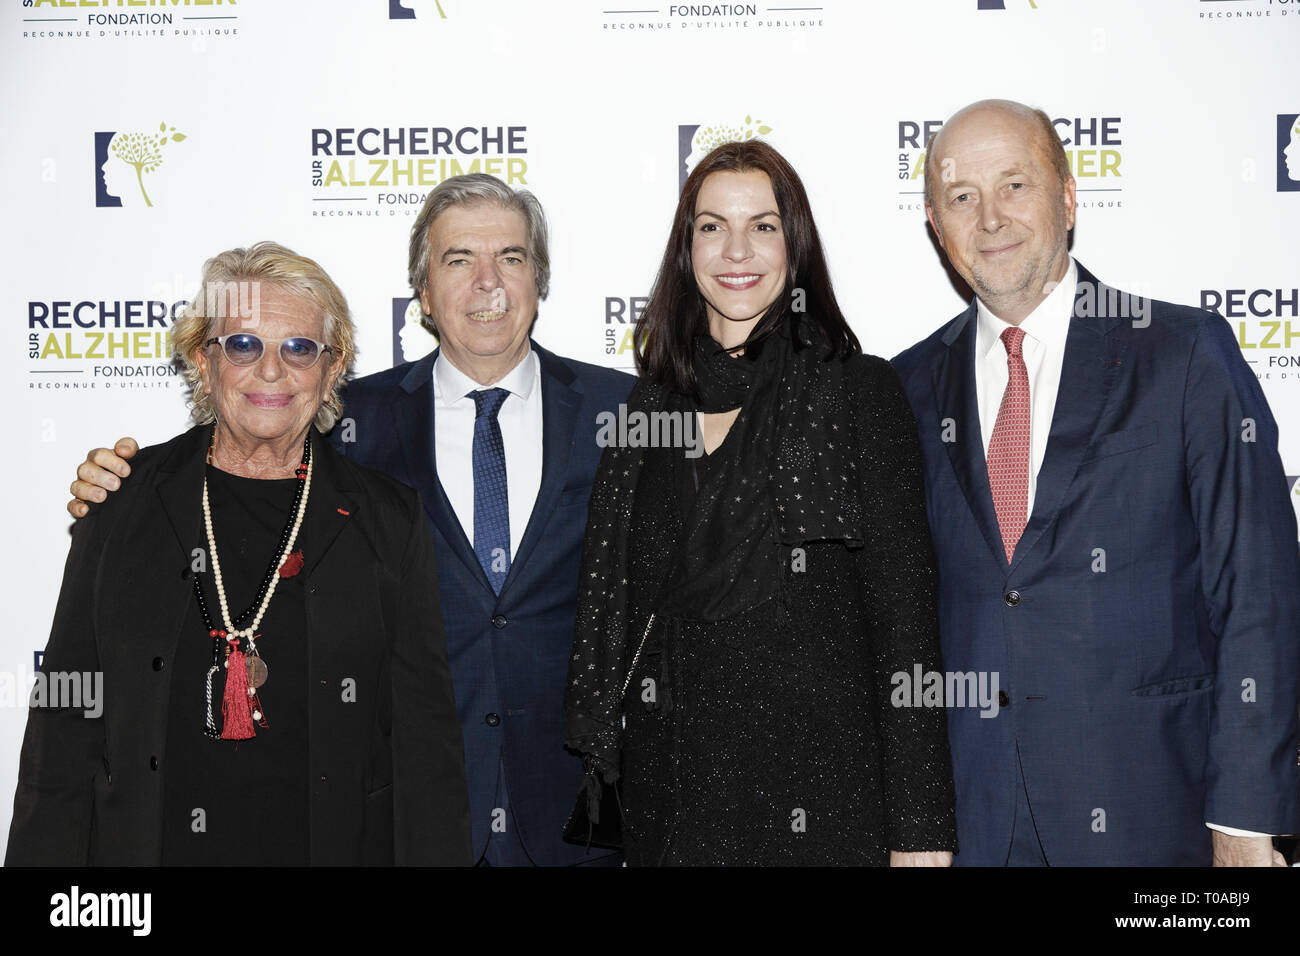 Paris, France. 18th Mar 2019. Veronique de Villele (L), Pr Bruno Dubois, a guest and Olivier De Ladoucette - Photocall of the 14th Gala 2019 of the Association for Alzheimer Research at the Olympia in Paris on March 18, 2019 Credit: Véronique PHITOUSSI/Alamy Live News Stock Photo